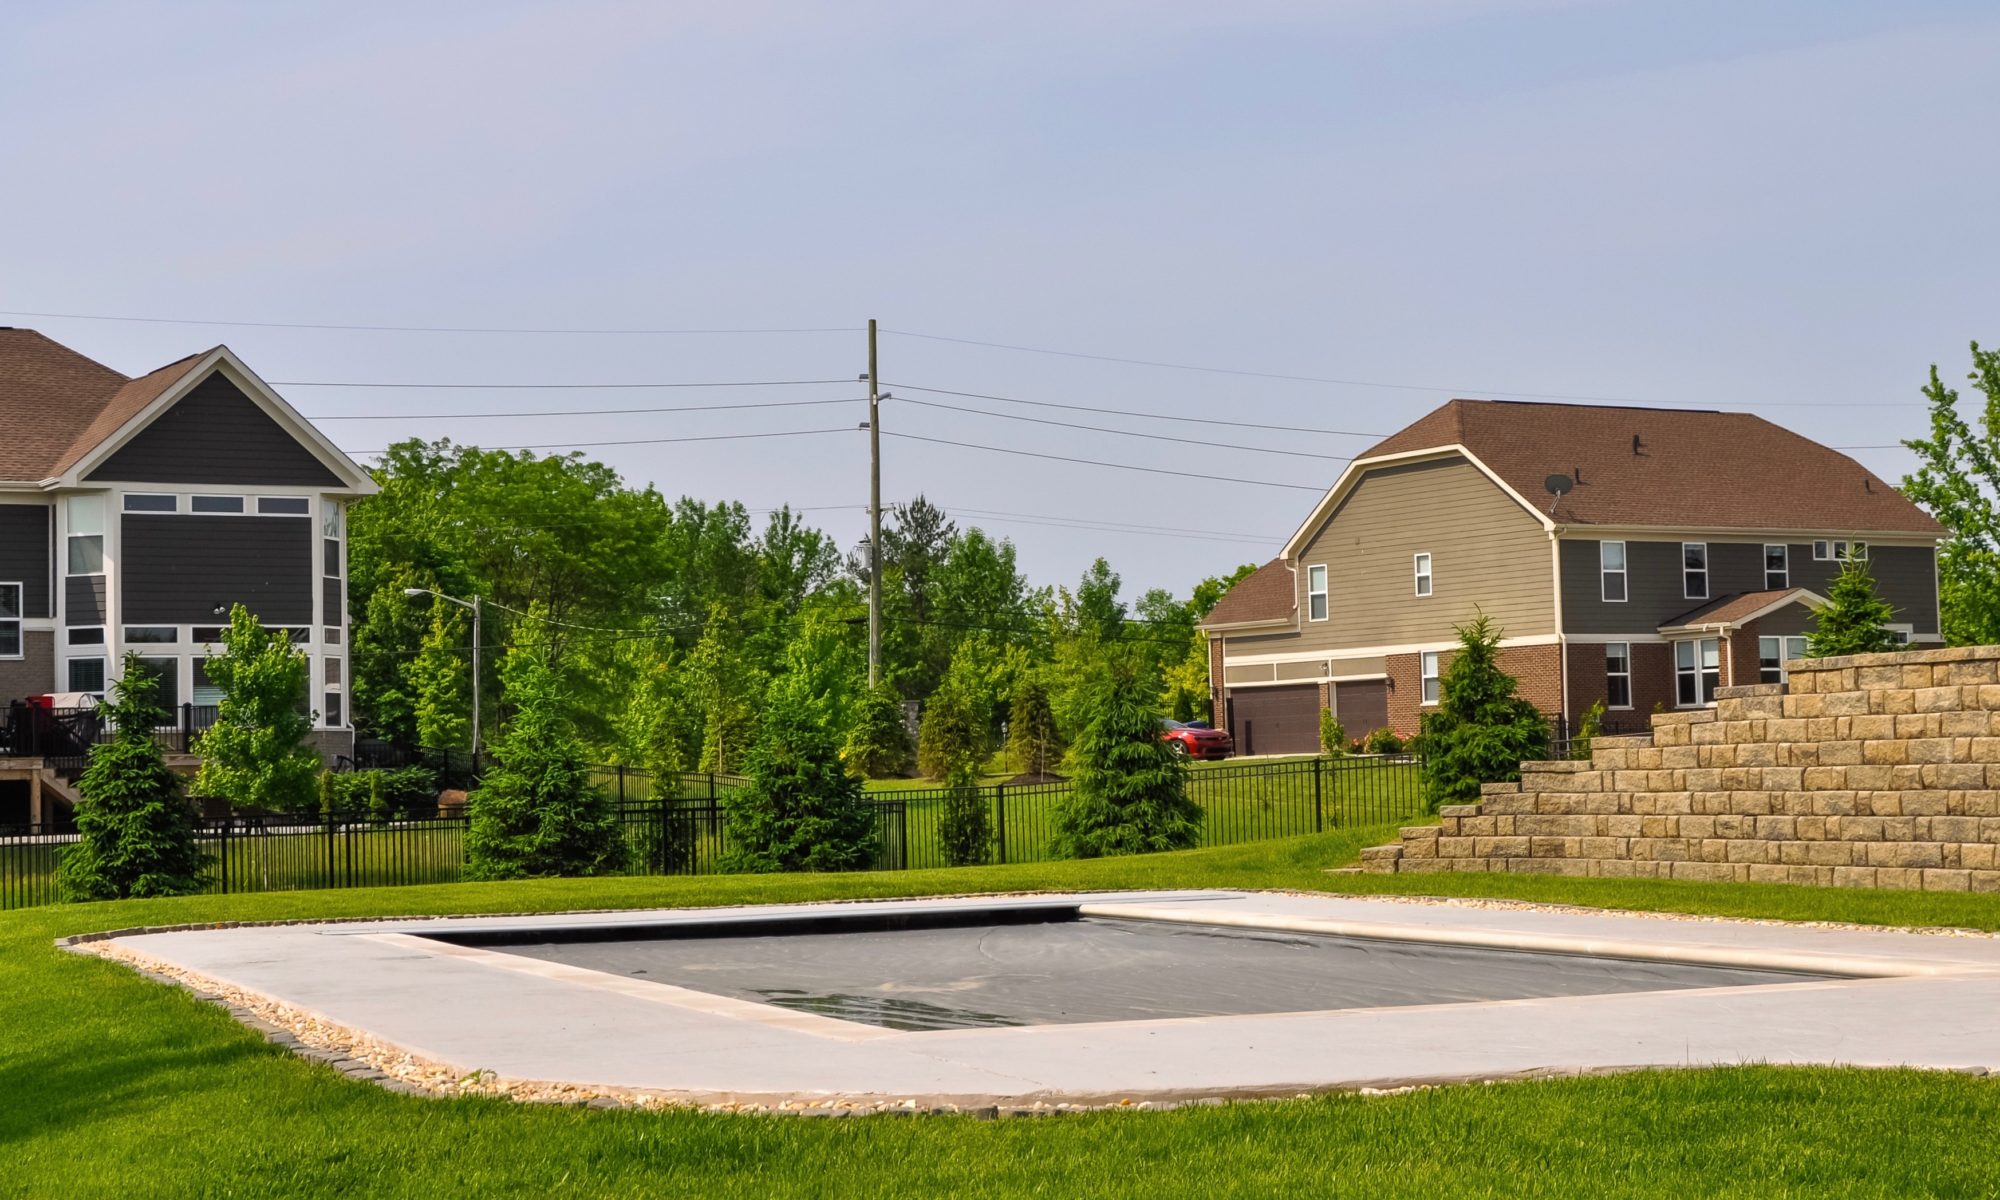 Precision Outdoors Carmel Pool Patio & Retaining Wall stamped concrete patio Italian slate template an accents belgard anchor highland stone cotswold mist color accent contemporary design simple concrete basketball court basic design custom